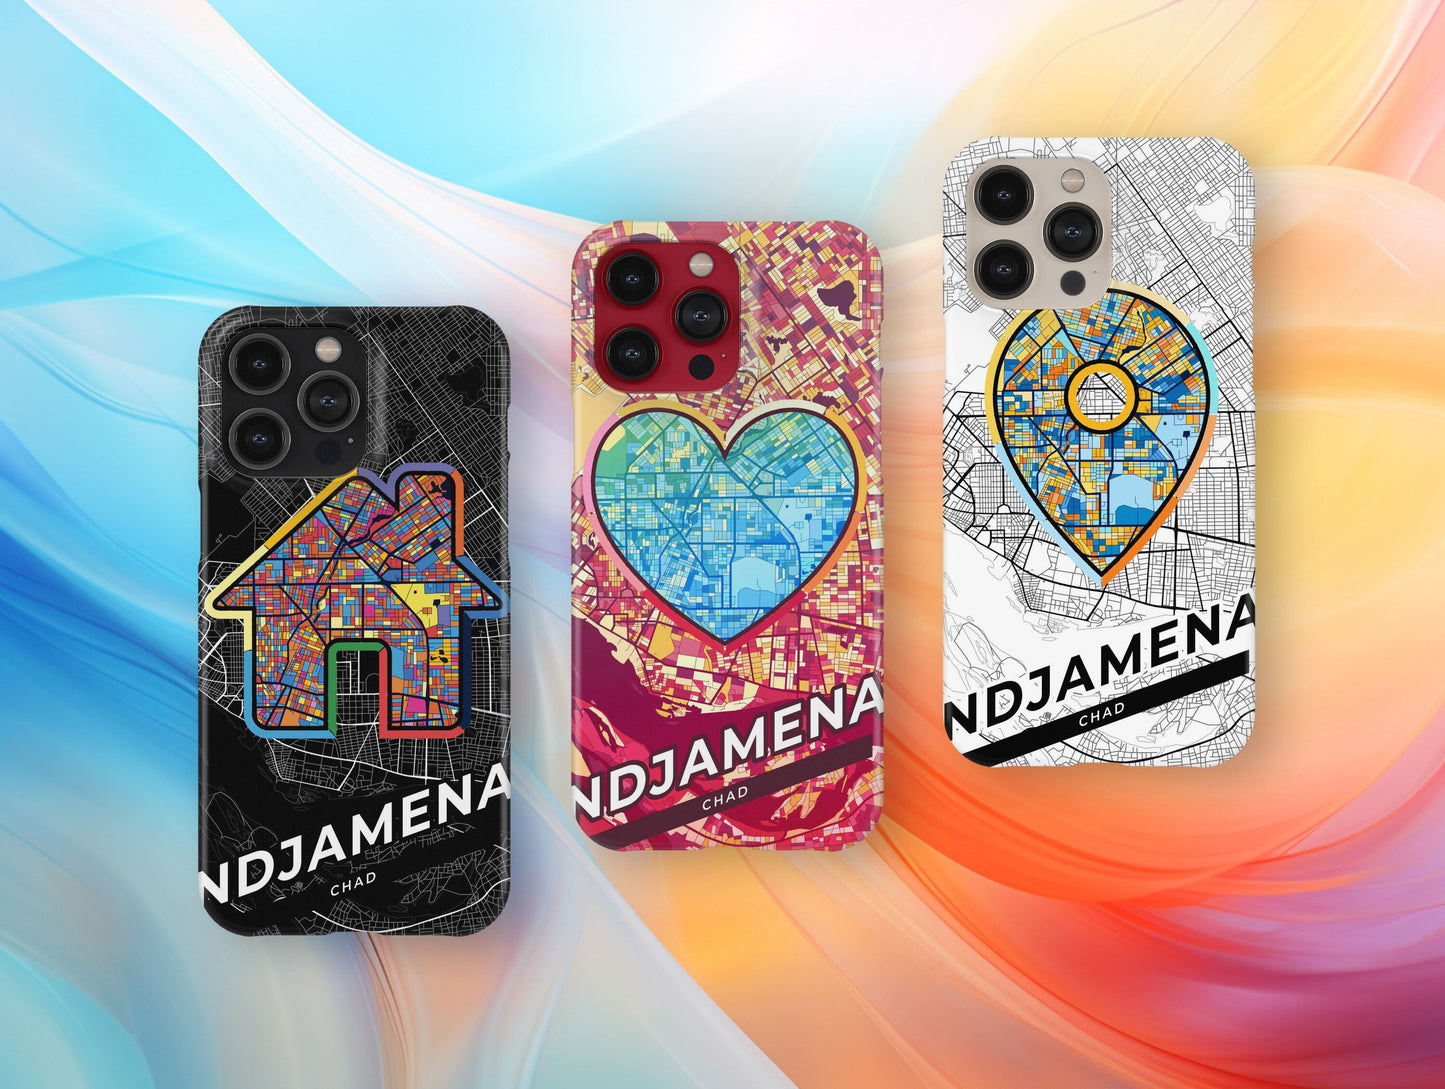 Ndjamena Chad slim phone case with colorful icon. Birthday, wedding or housewarming gift. Couple match cases.